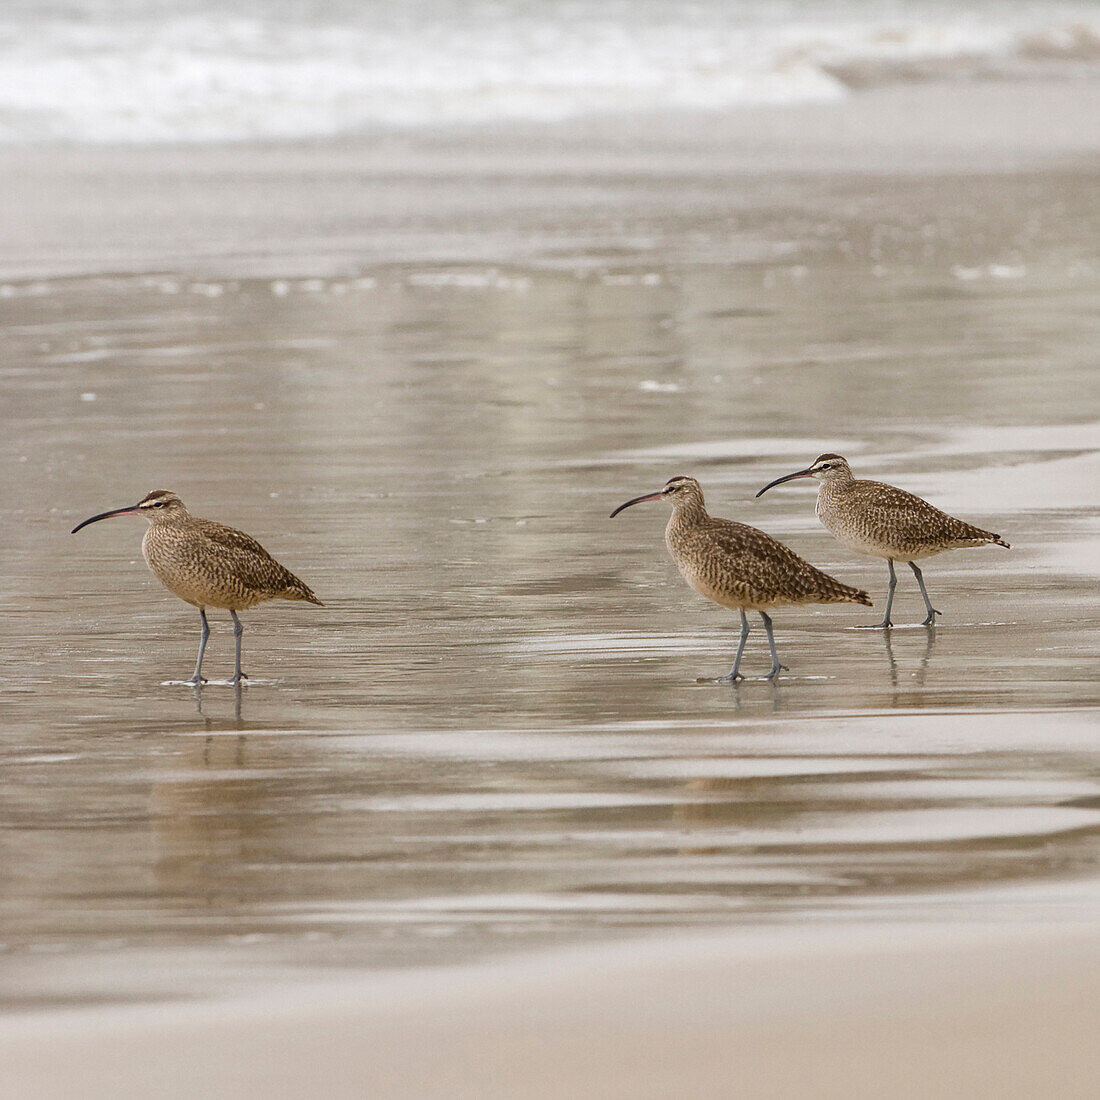 USA, California, Pismo Beach. Whimbrels parading in early morning fog during low tide.